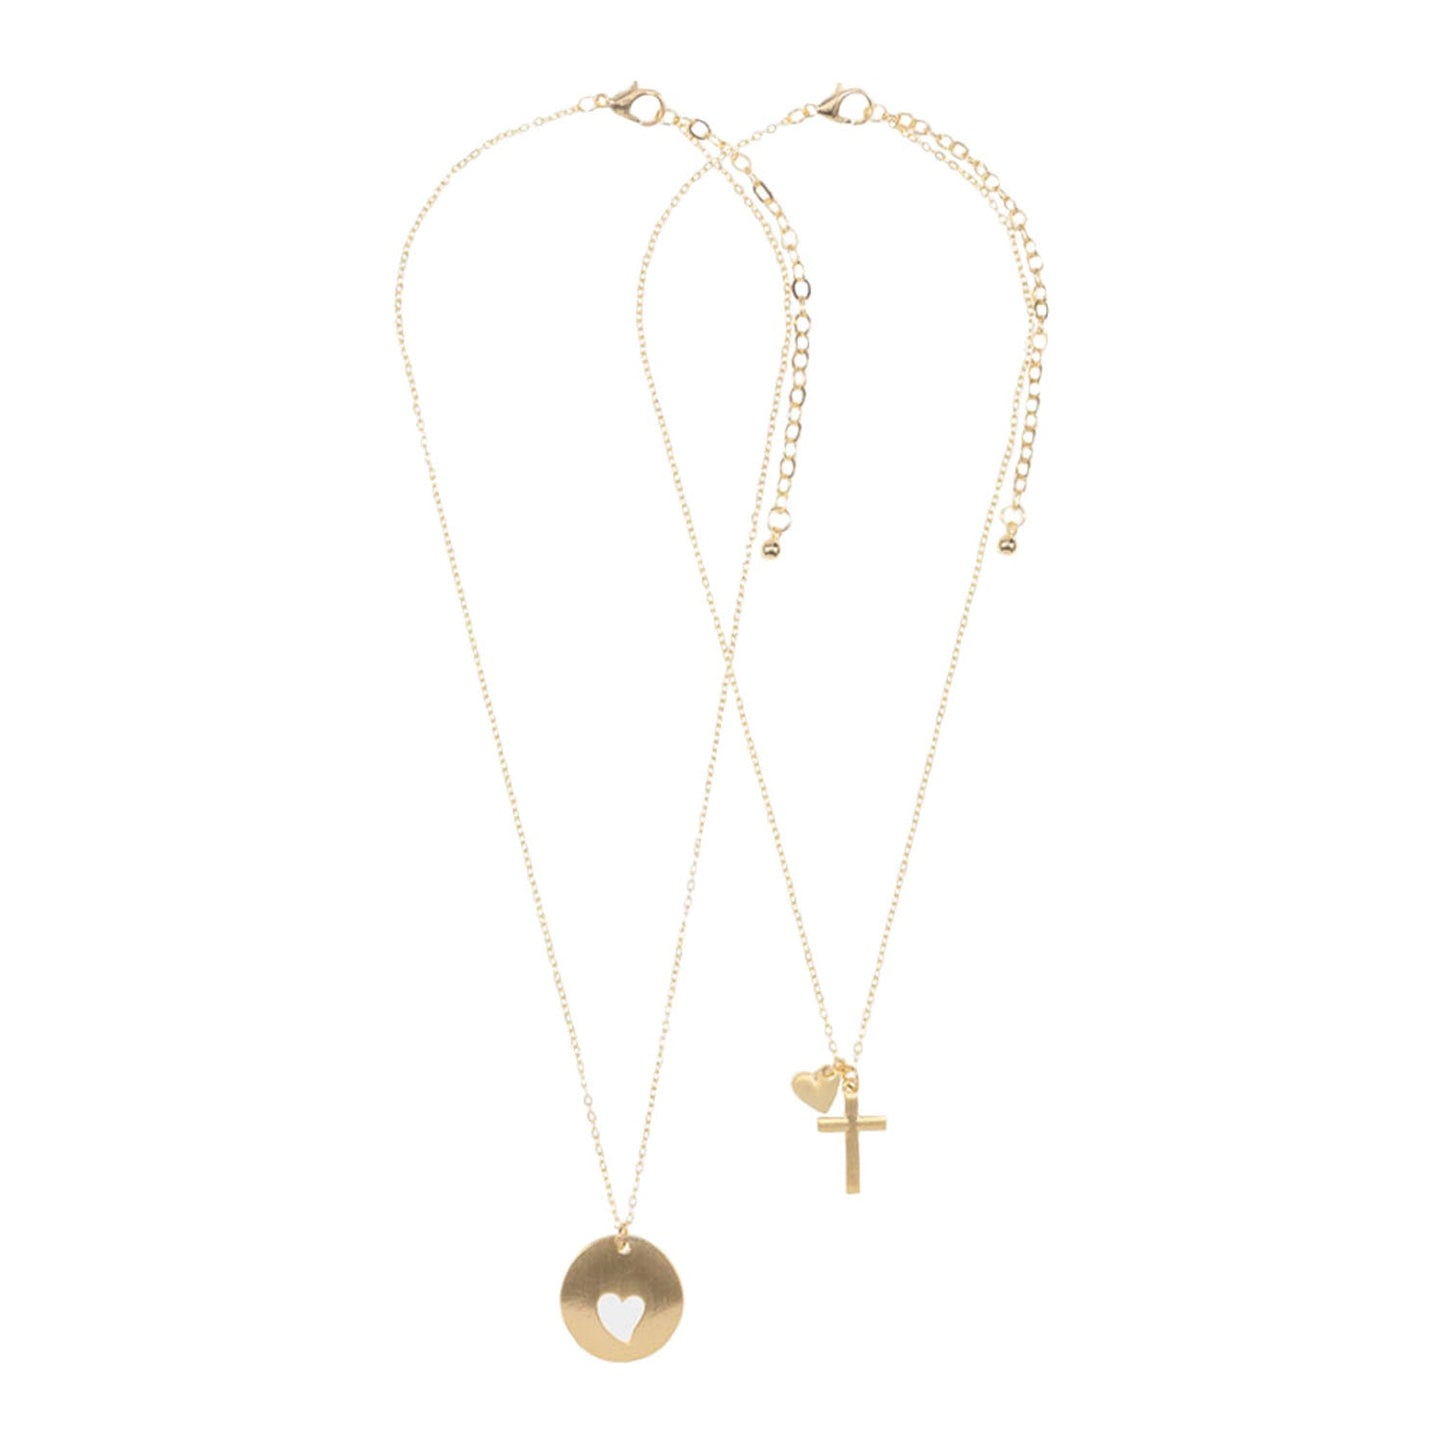 Gold 2PCS Heart Cross Pendant Moms and Kids Set Necklaces. These Necklace jewellery sets are Elegant. Beautifully crafted design adds a gorgeous glow to any outfit. Get ready with these Necklace and a jewellery set. Suitable for wear Party, Wedding, Date Night or any special events. Perfect Birthday Gift, Anniversary Gift, Thank you Gift or any special occasion.